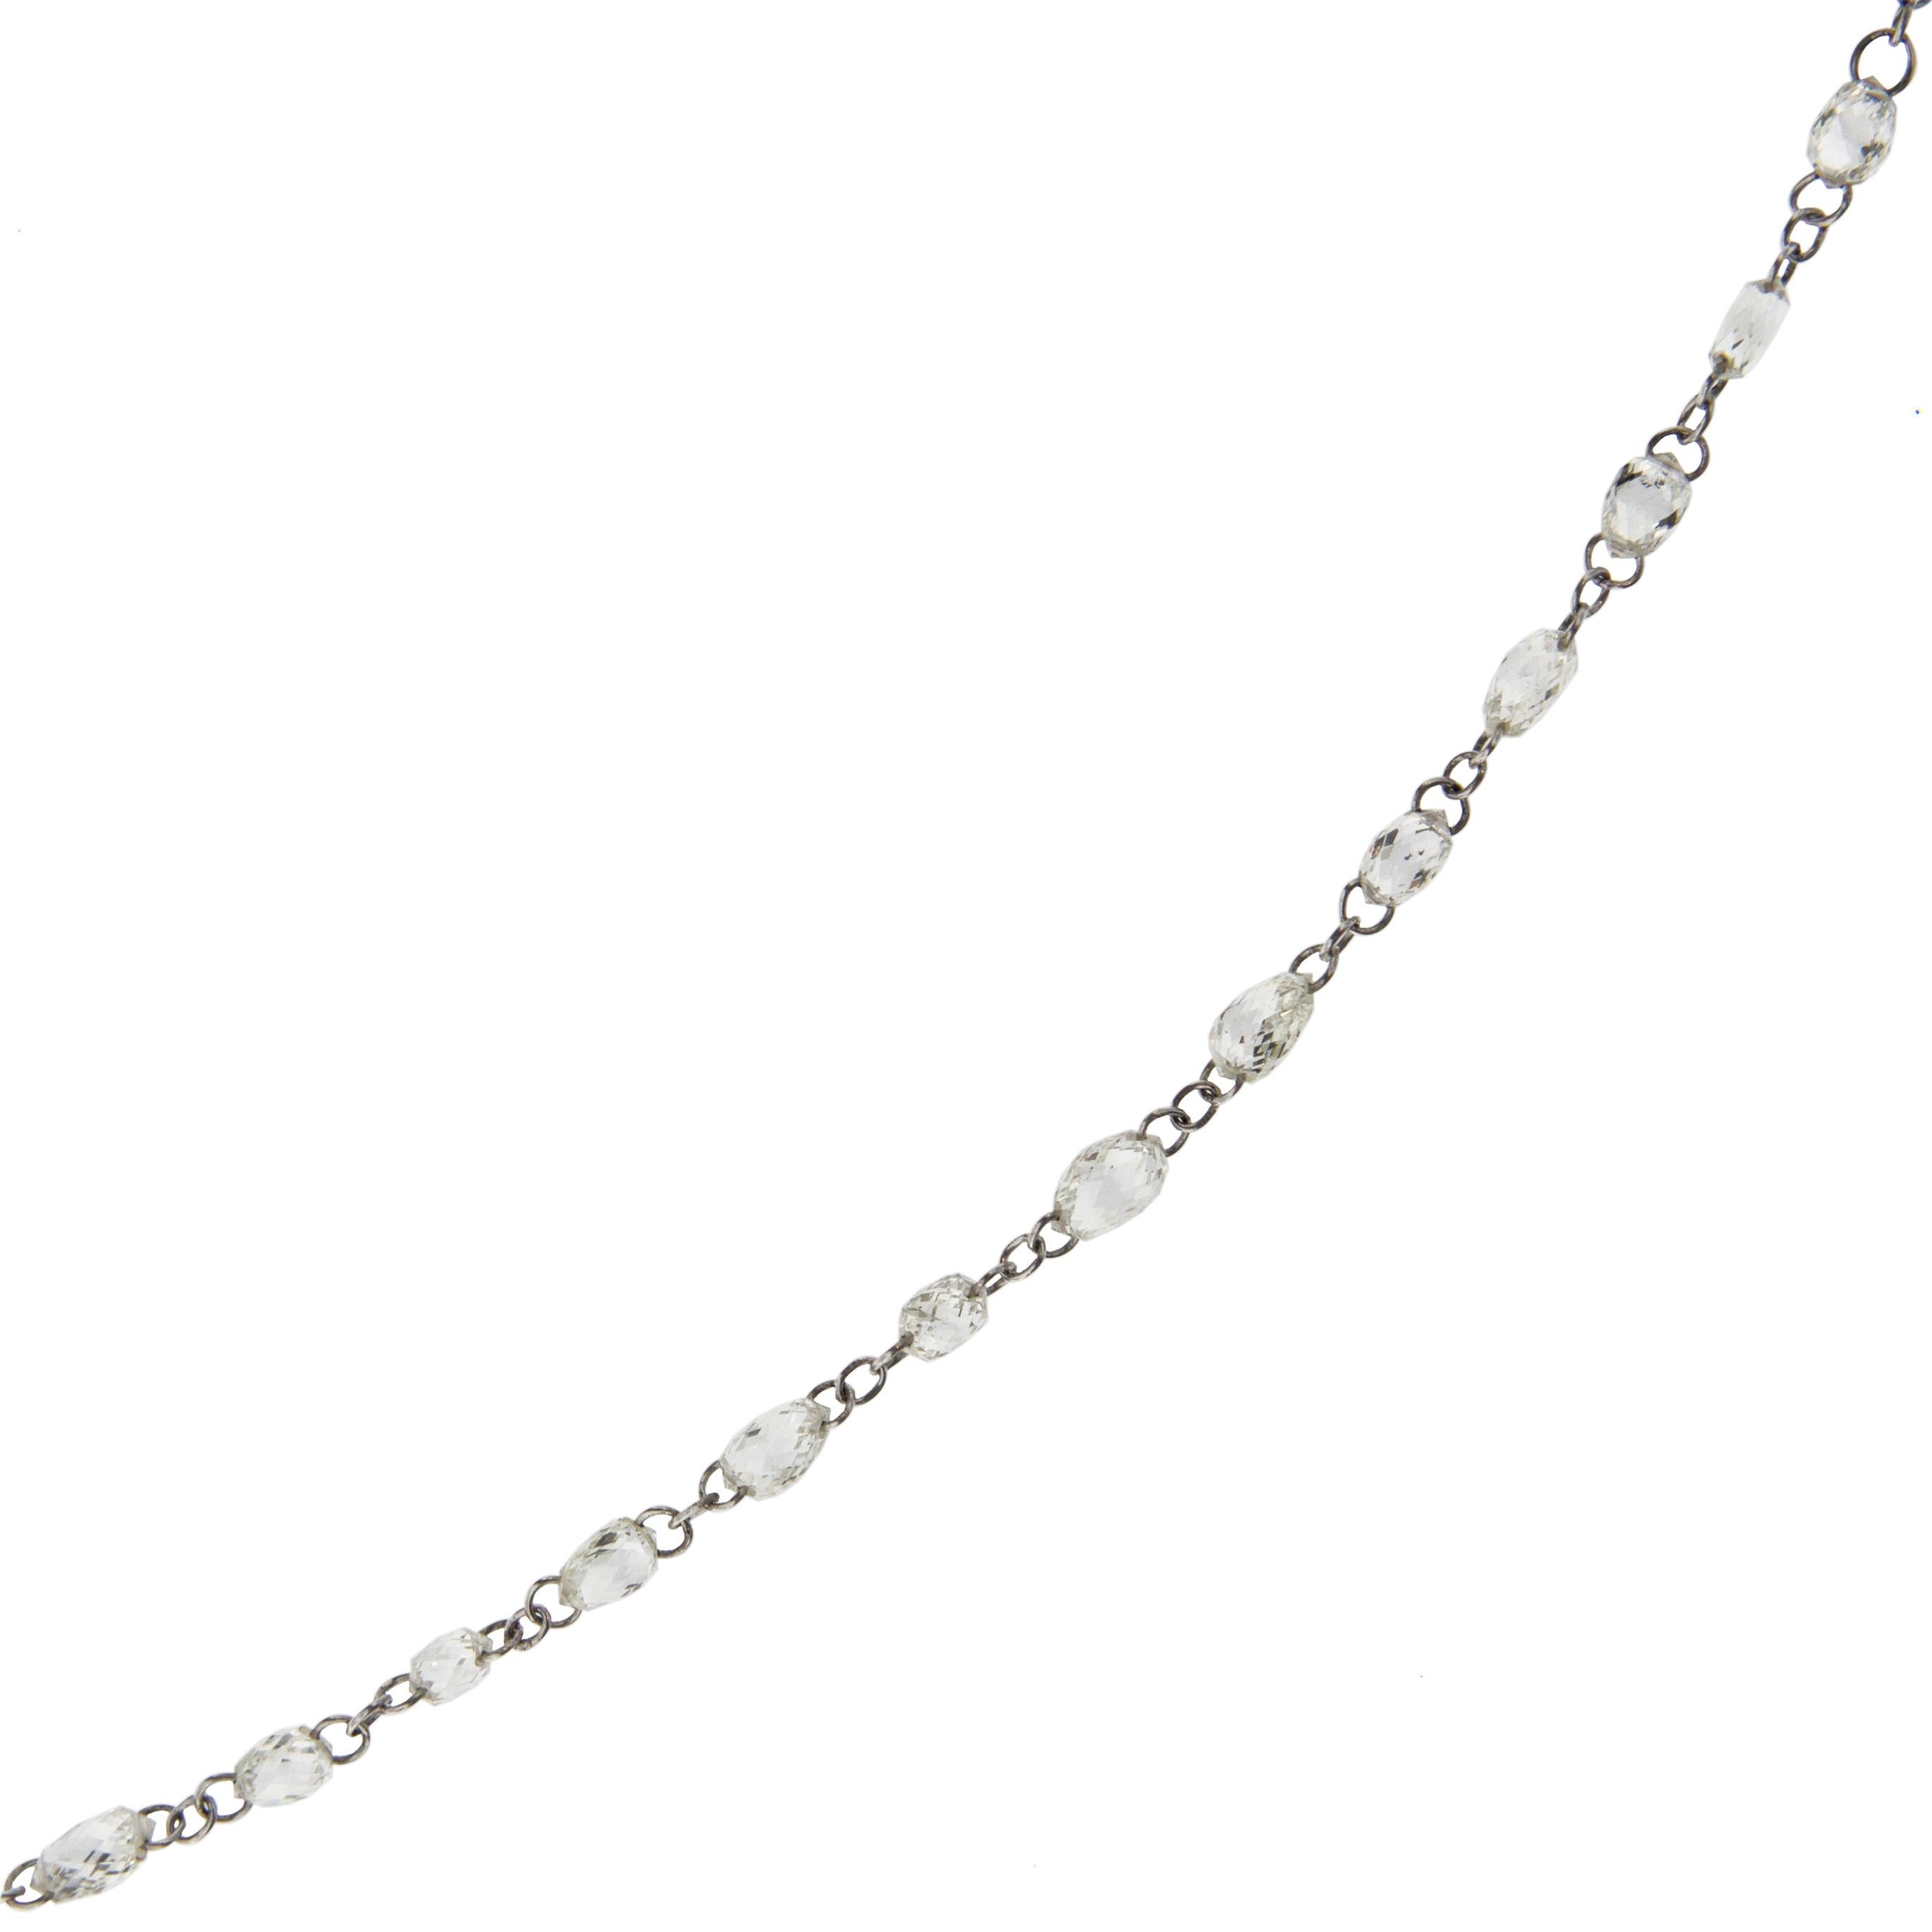 Jona design collection, hand crafted in Italy, 18 karat white gold Necklace featuring 186 Briolette Cut White Diamonds weighing 28.35 carats in total. Chain Length : 120 cm / 47.24 in.
Weight in total : 7.91 g
All Jona jewelry is new and has never